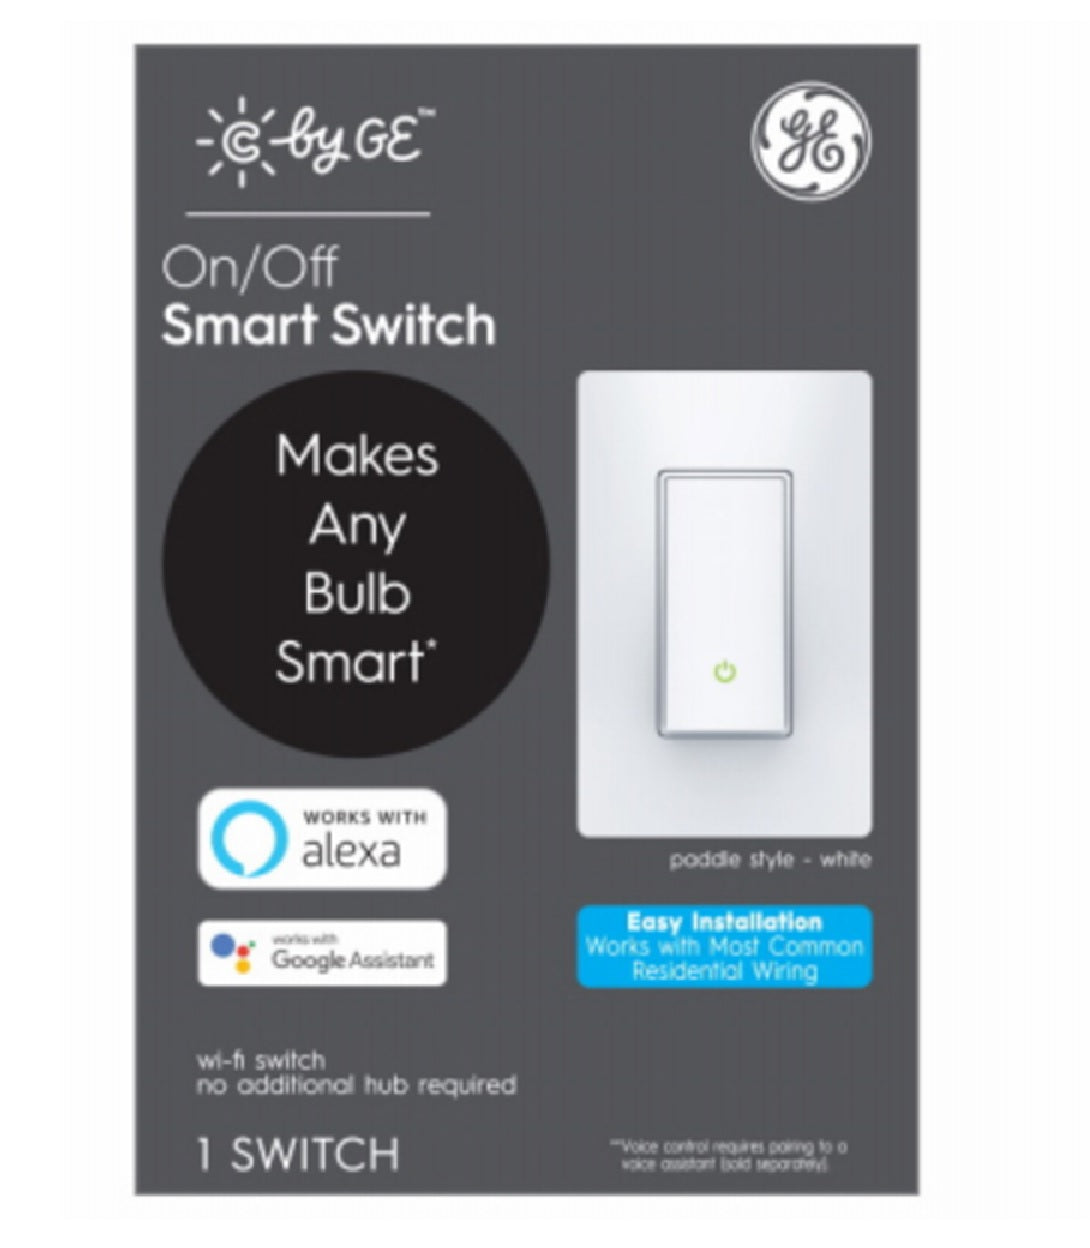 GE 93120081 On/Off Smart Switch, White